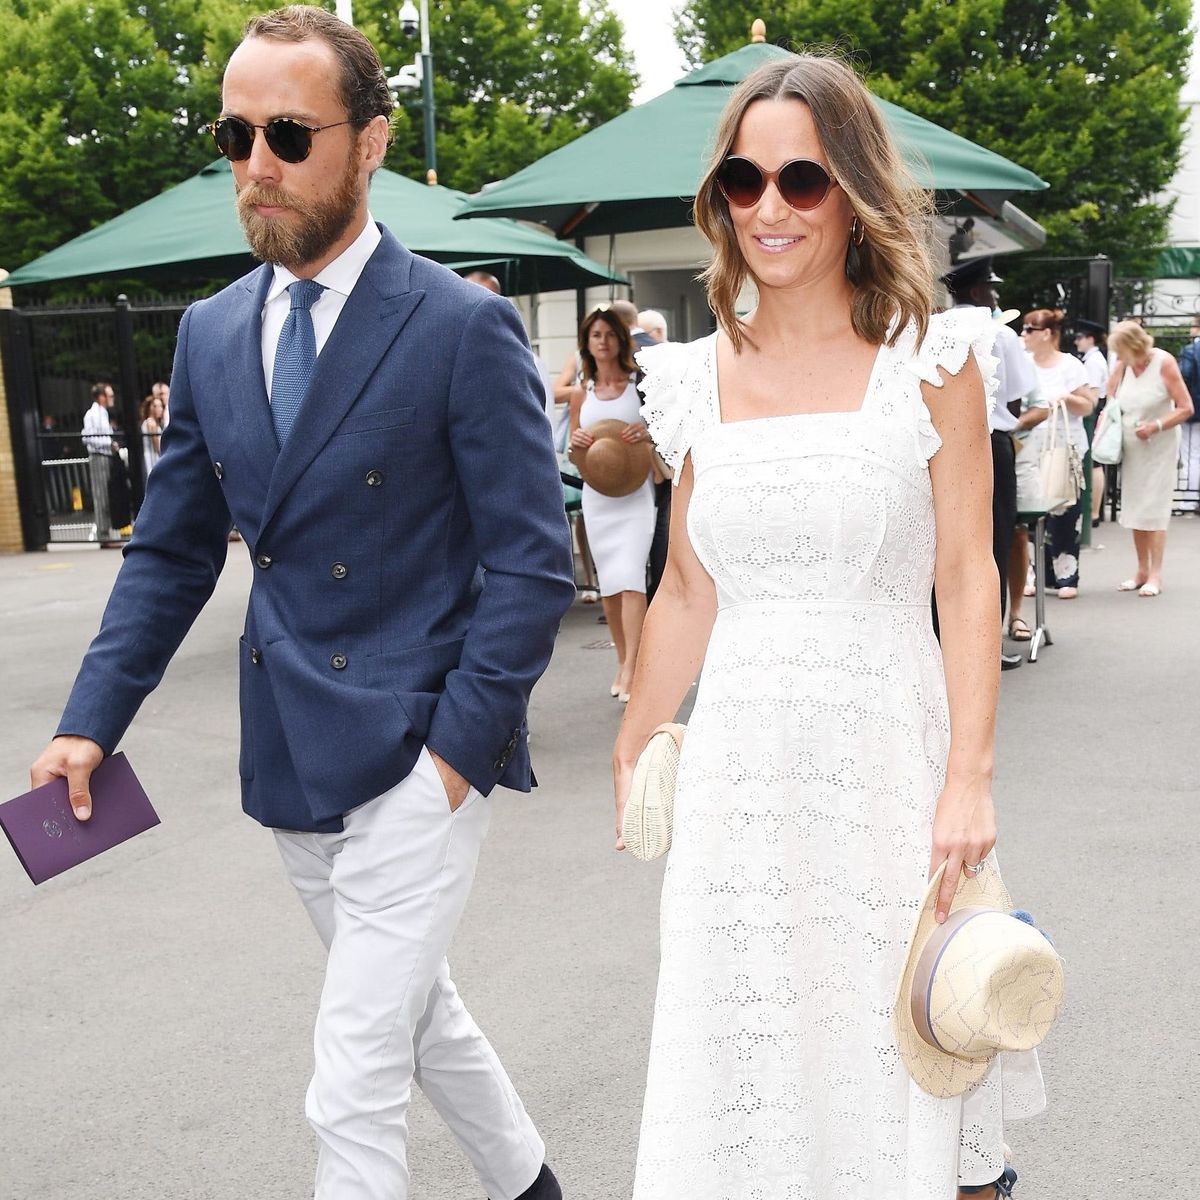 All the Winning Fashion Buys We Spotted at Wimbledon